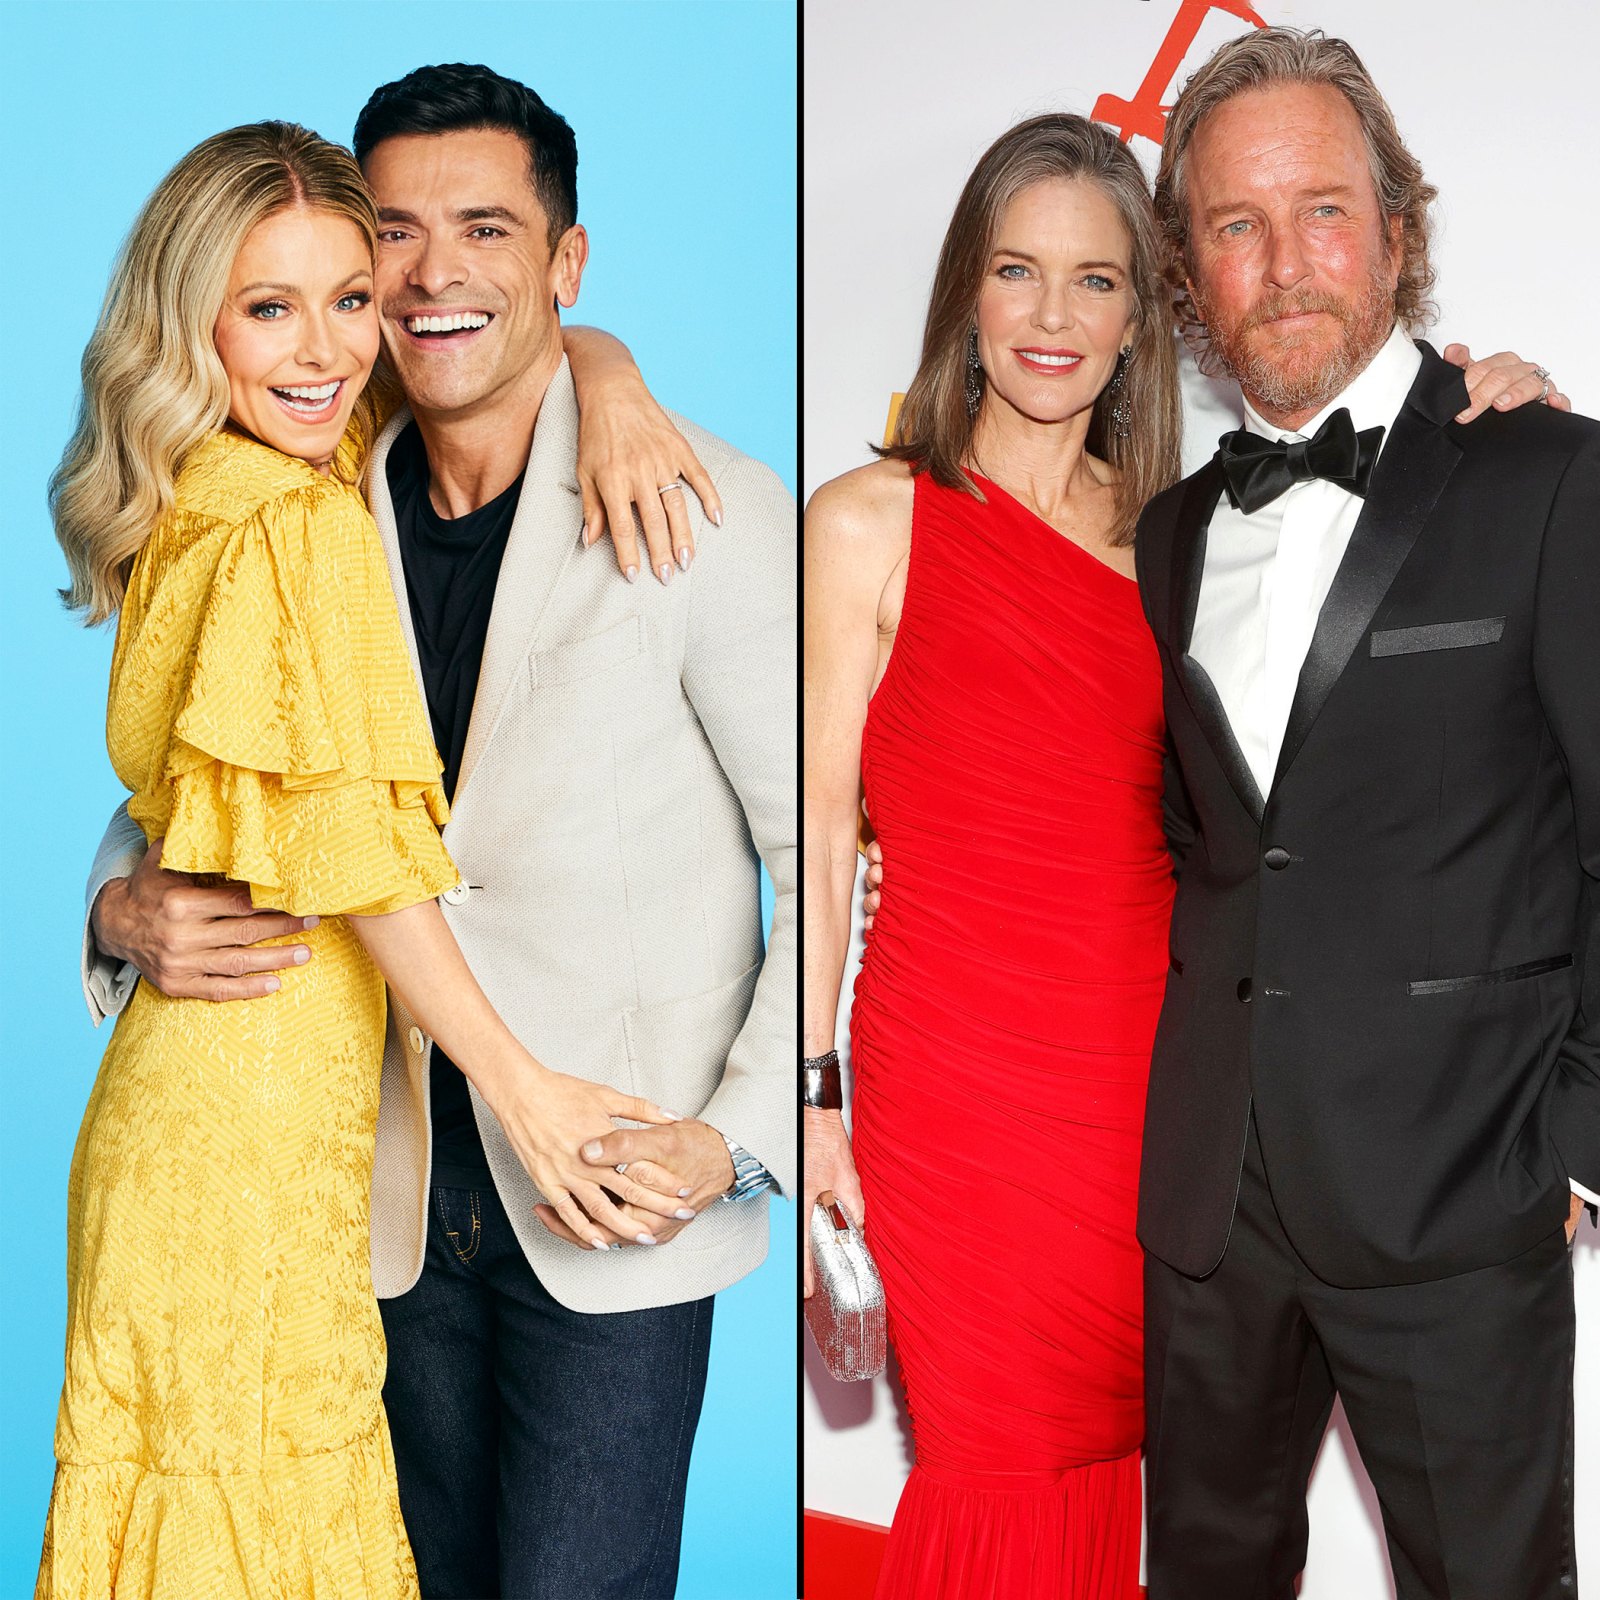 Celebrity Couples Who Starred in Soap Operas Together Over the Years- From Kelly Ripa and Mark Consuelos to Susan Walters and Linden Ashby 337 Mark Consuelos and Kelly Ripa Susan Walters and Linden Ashby